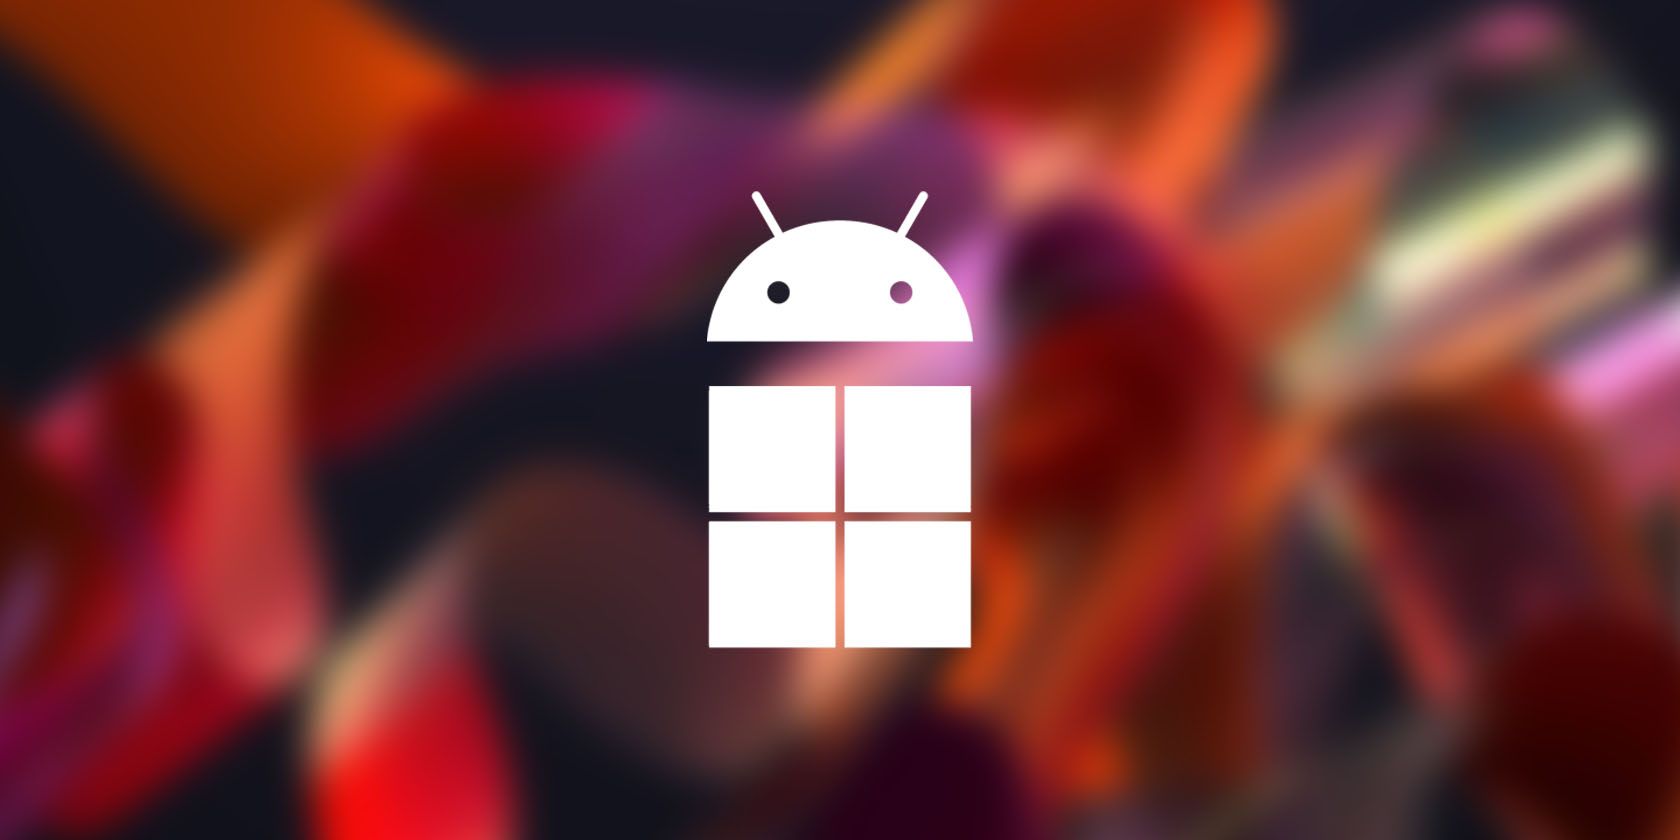 Windows Android Feature Image